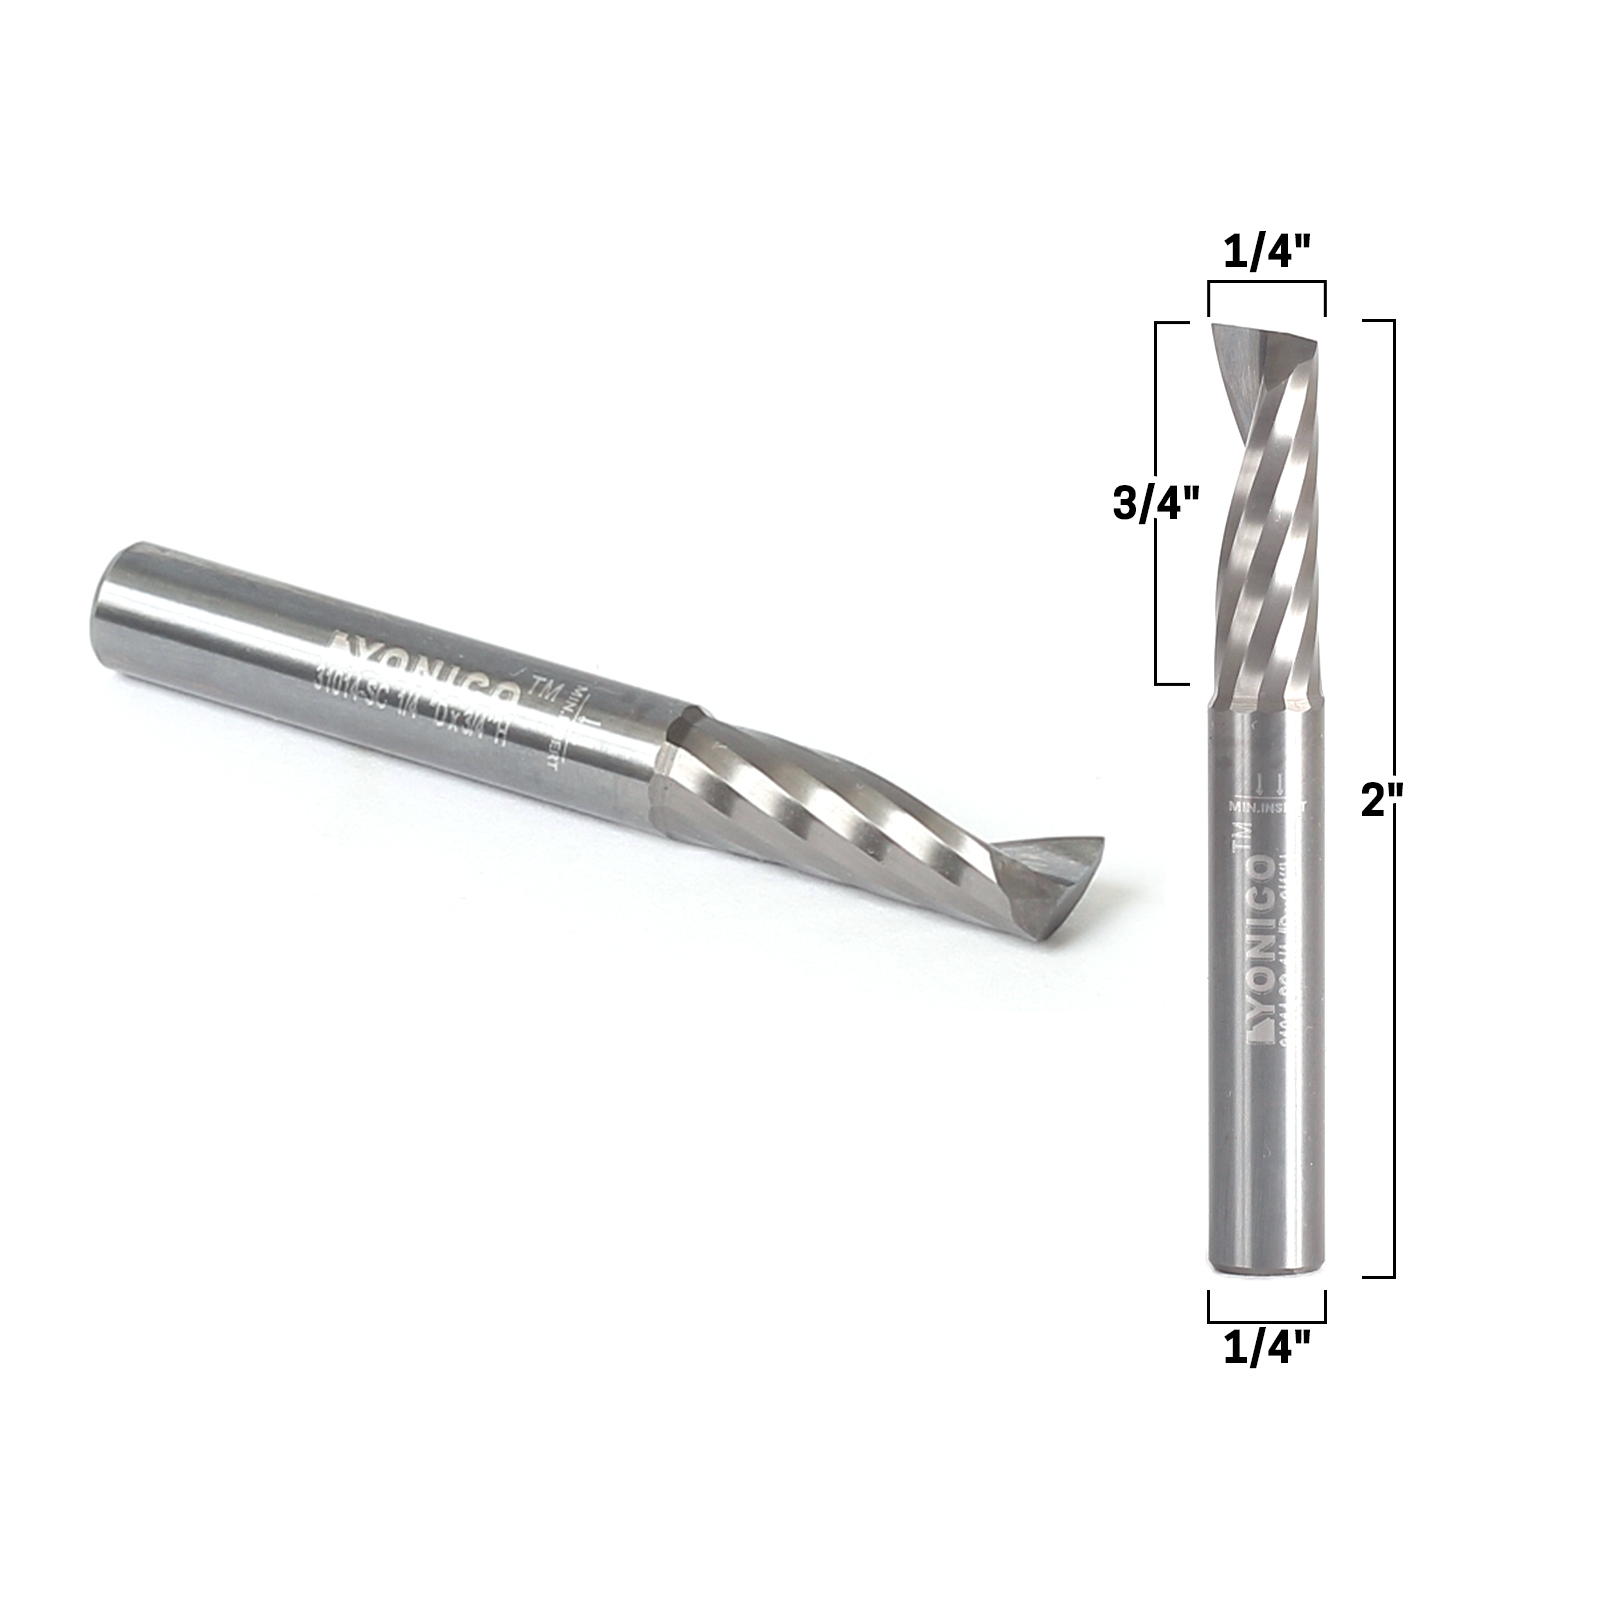 Rohit O Flute Up Cut 1/4 inch Solid Carbide End Mill Single Flute Spiral CNC Router Bit 1/4 inch Shank for Aluminum and Acrylic Cutting 